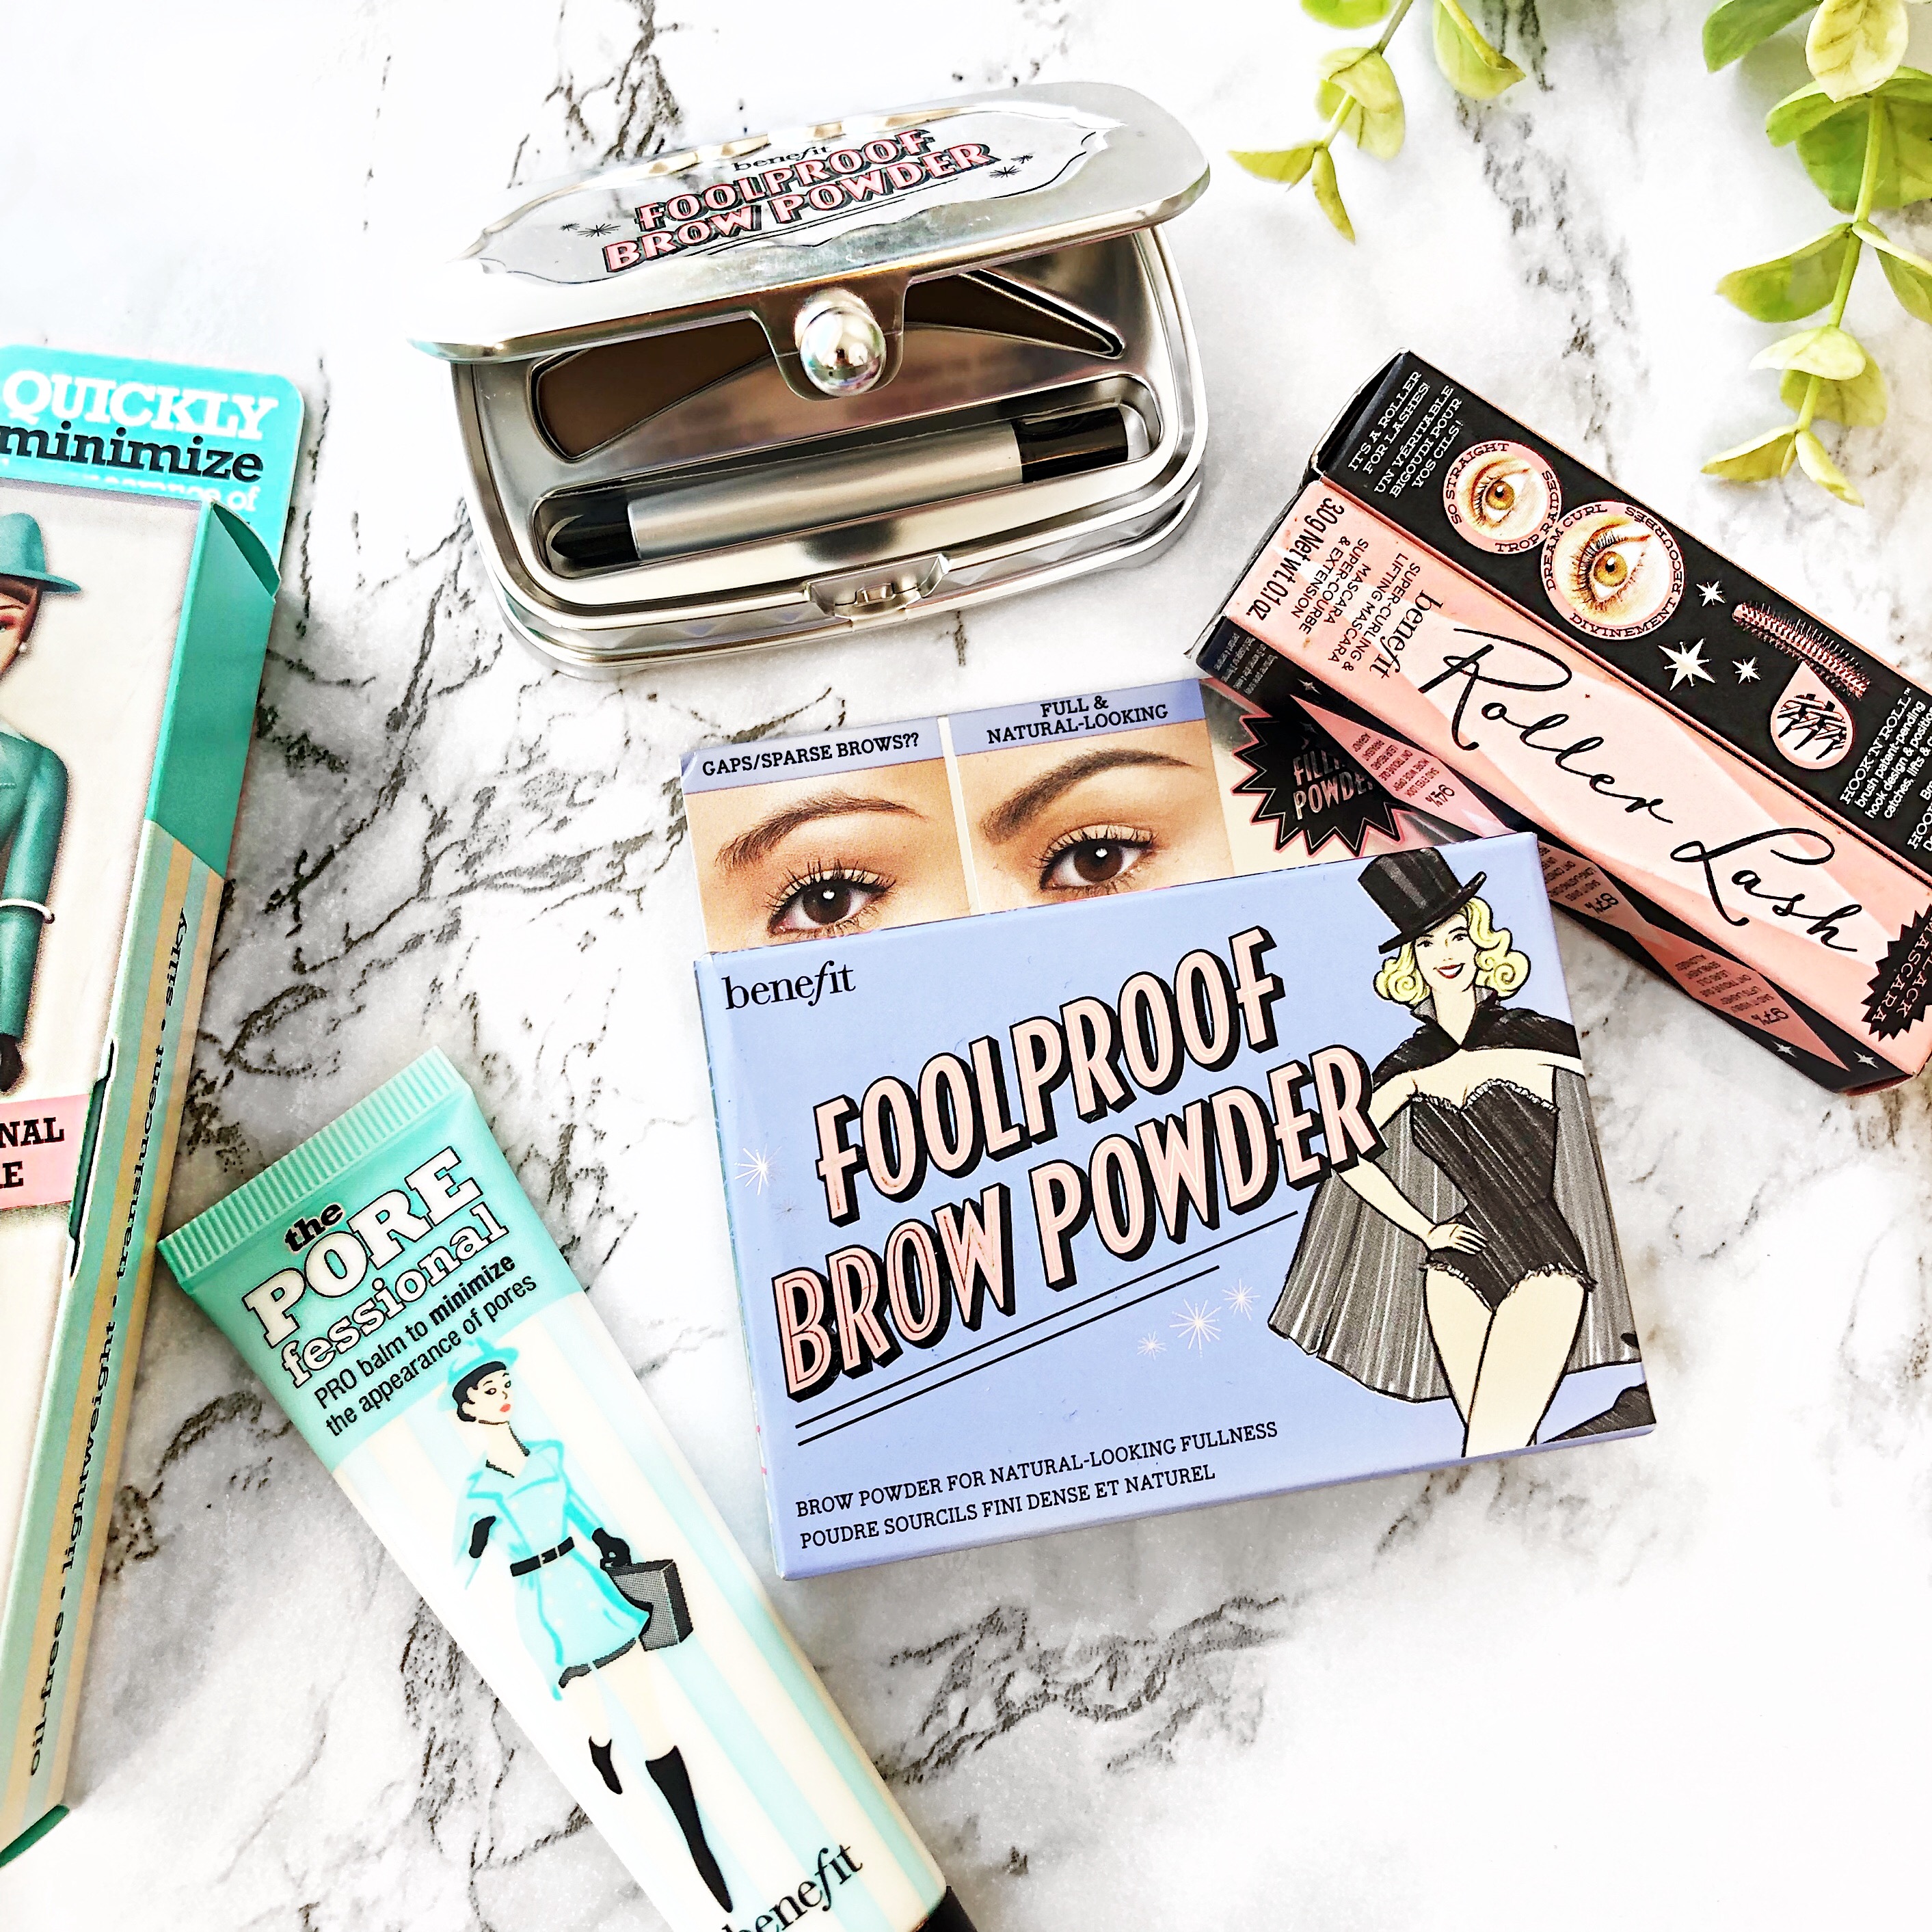 Benefit Cosmetics is on a roll with innovation